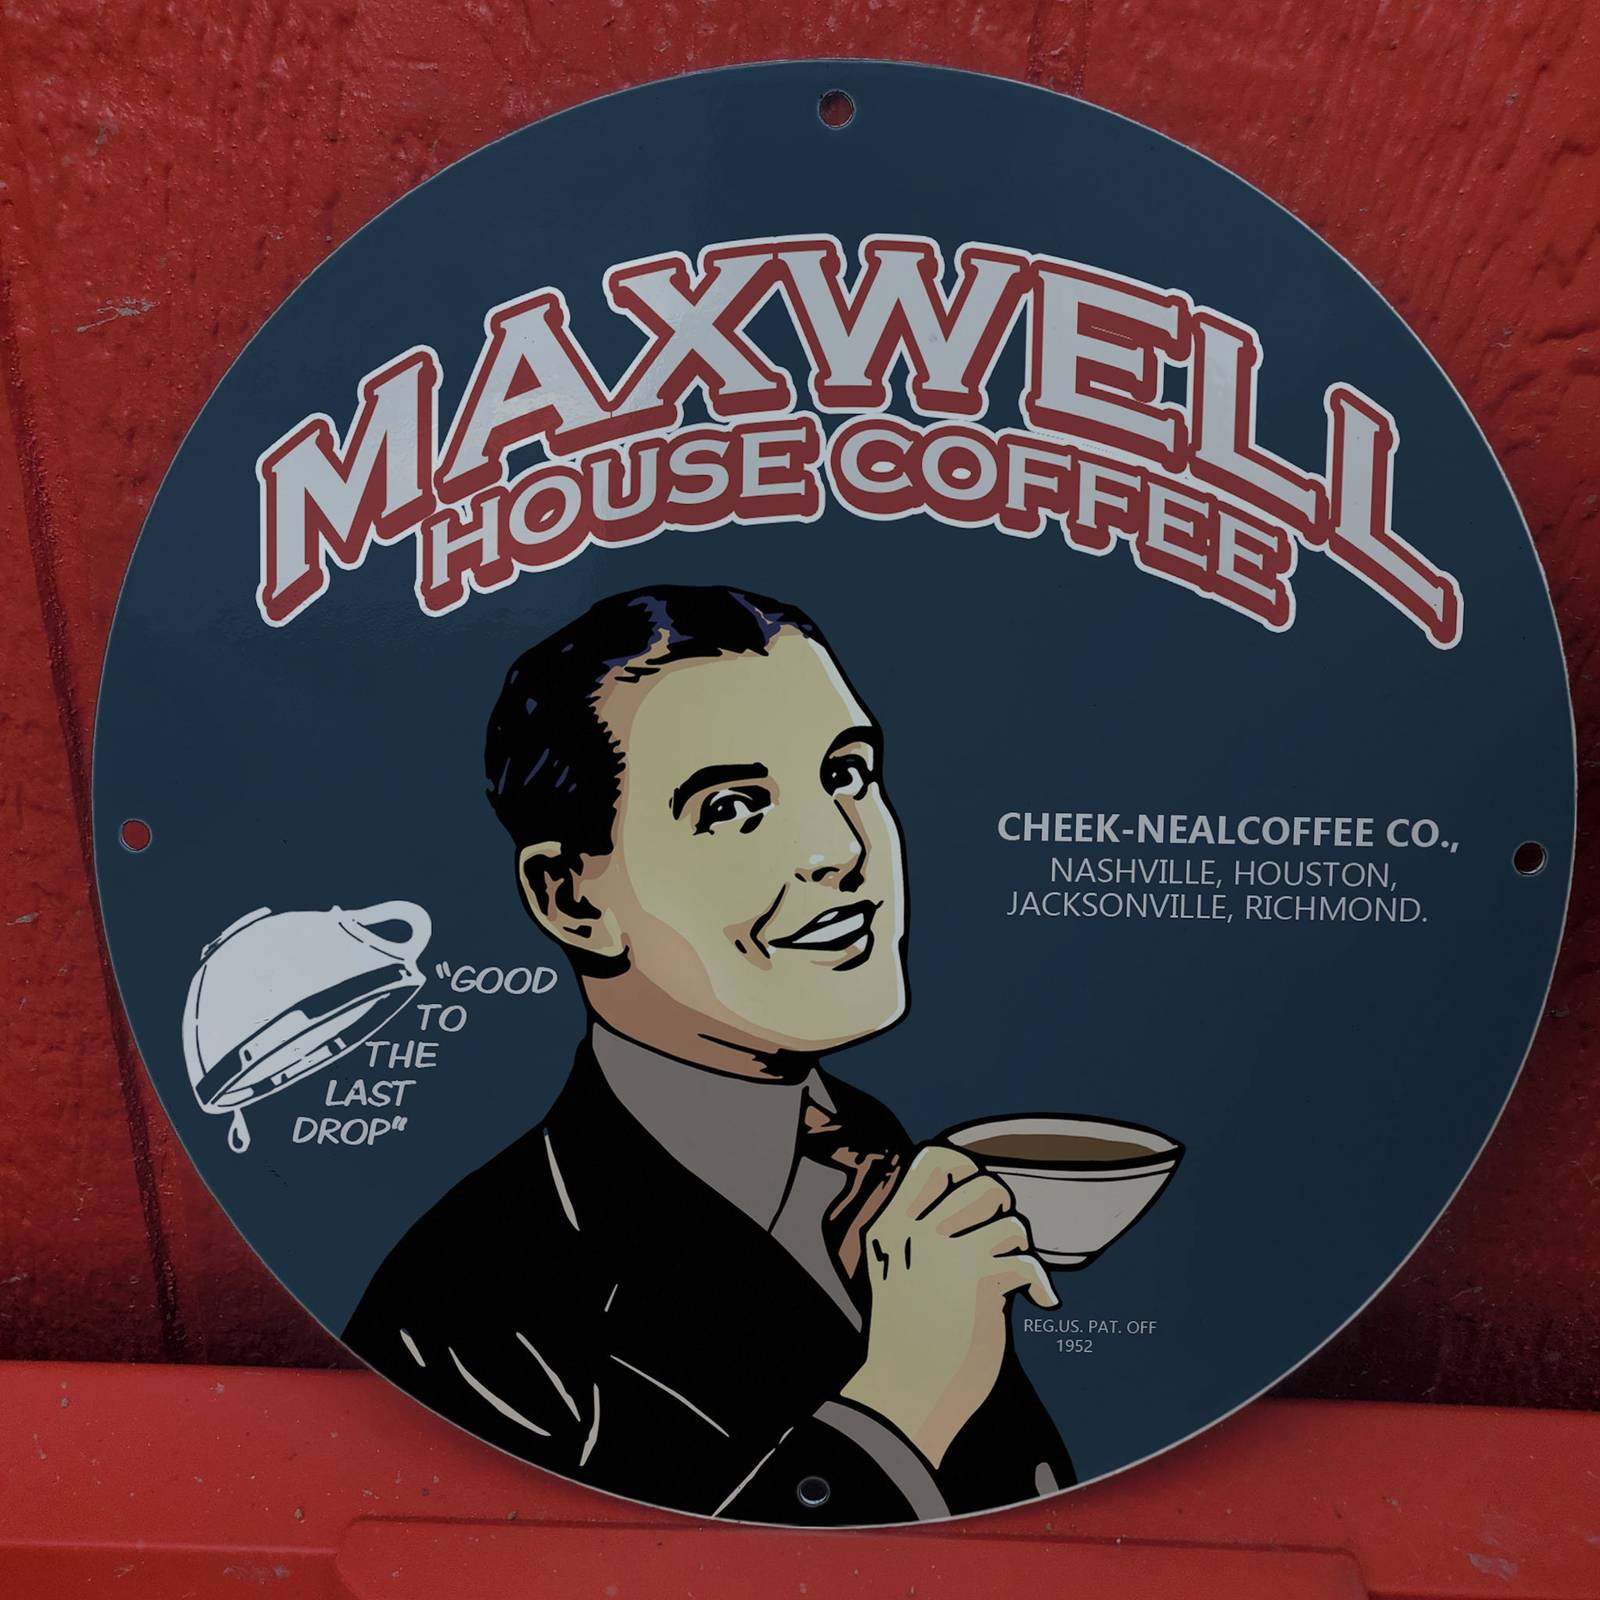 Vintage 1952 Maxwell House Coffee Cheek-Neal Coffee Co. Porcelain Gas & Oil Sign - $125.00